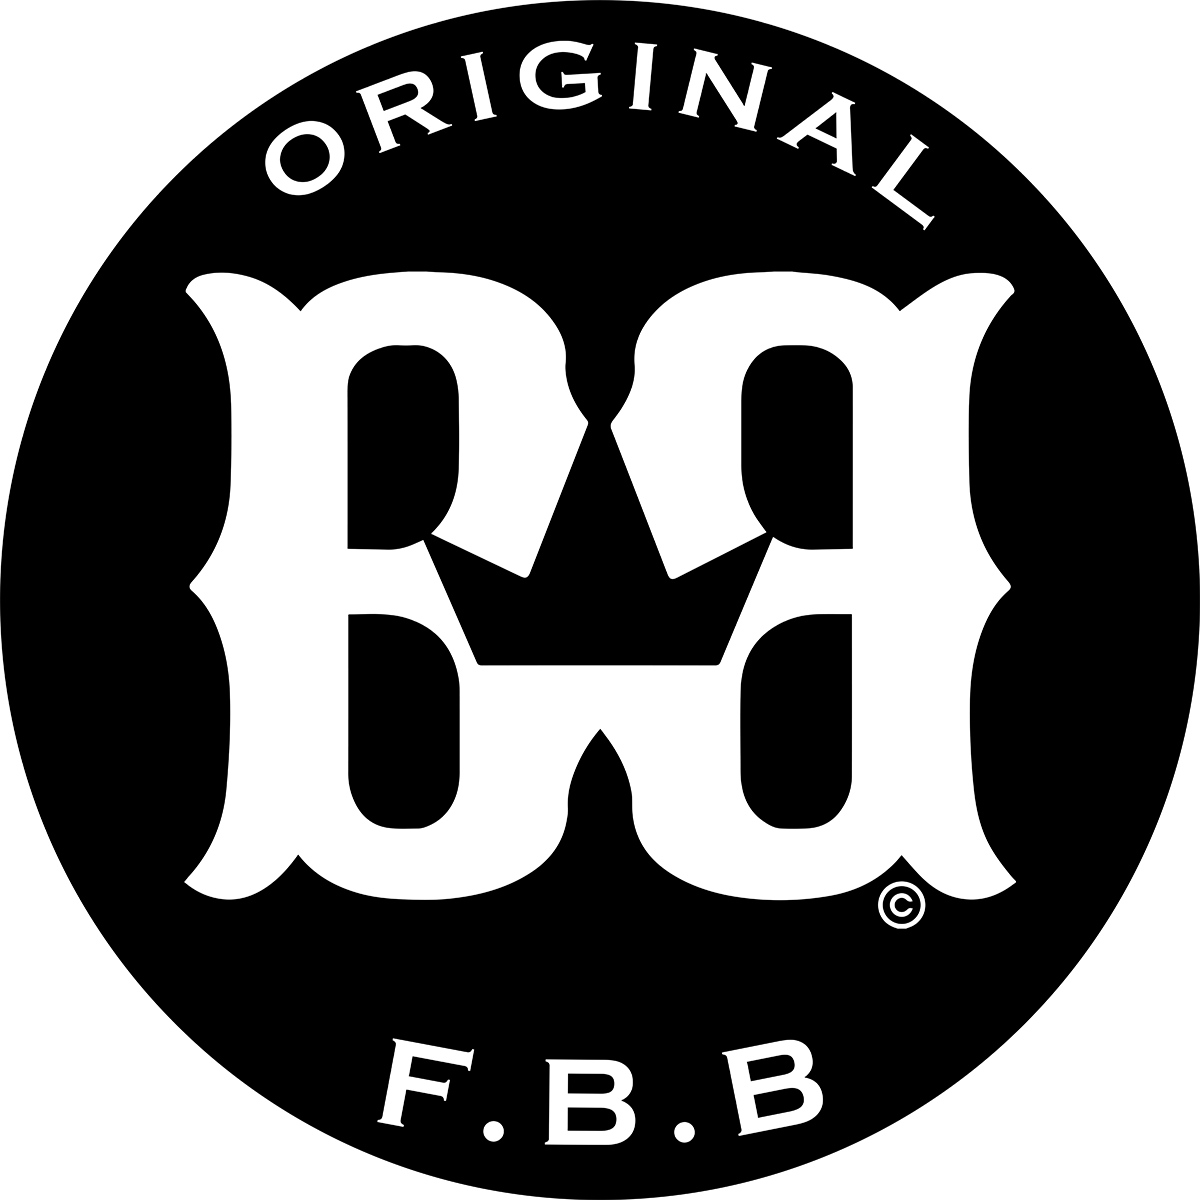 Originalfbb clothing and accessories for men, women and children.